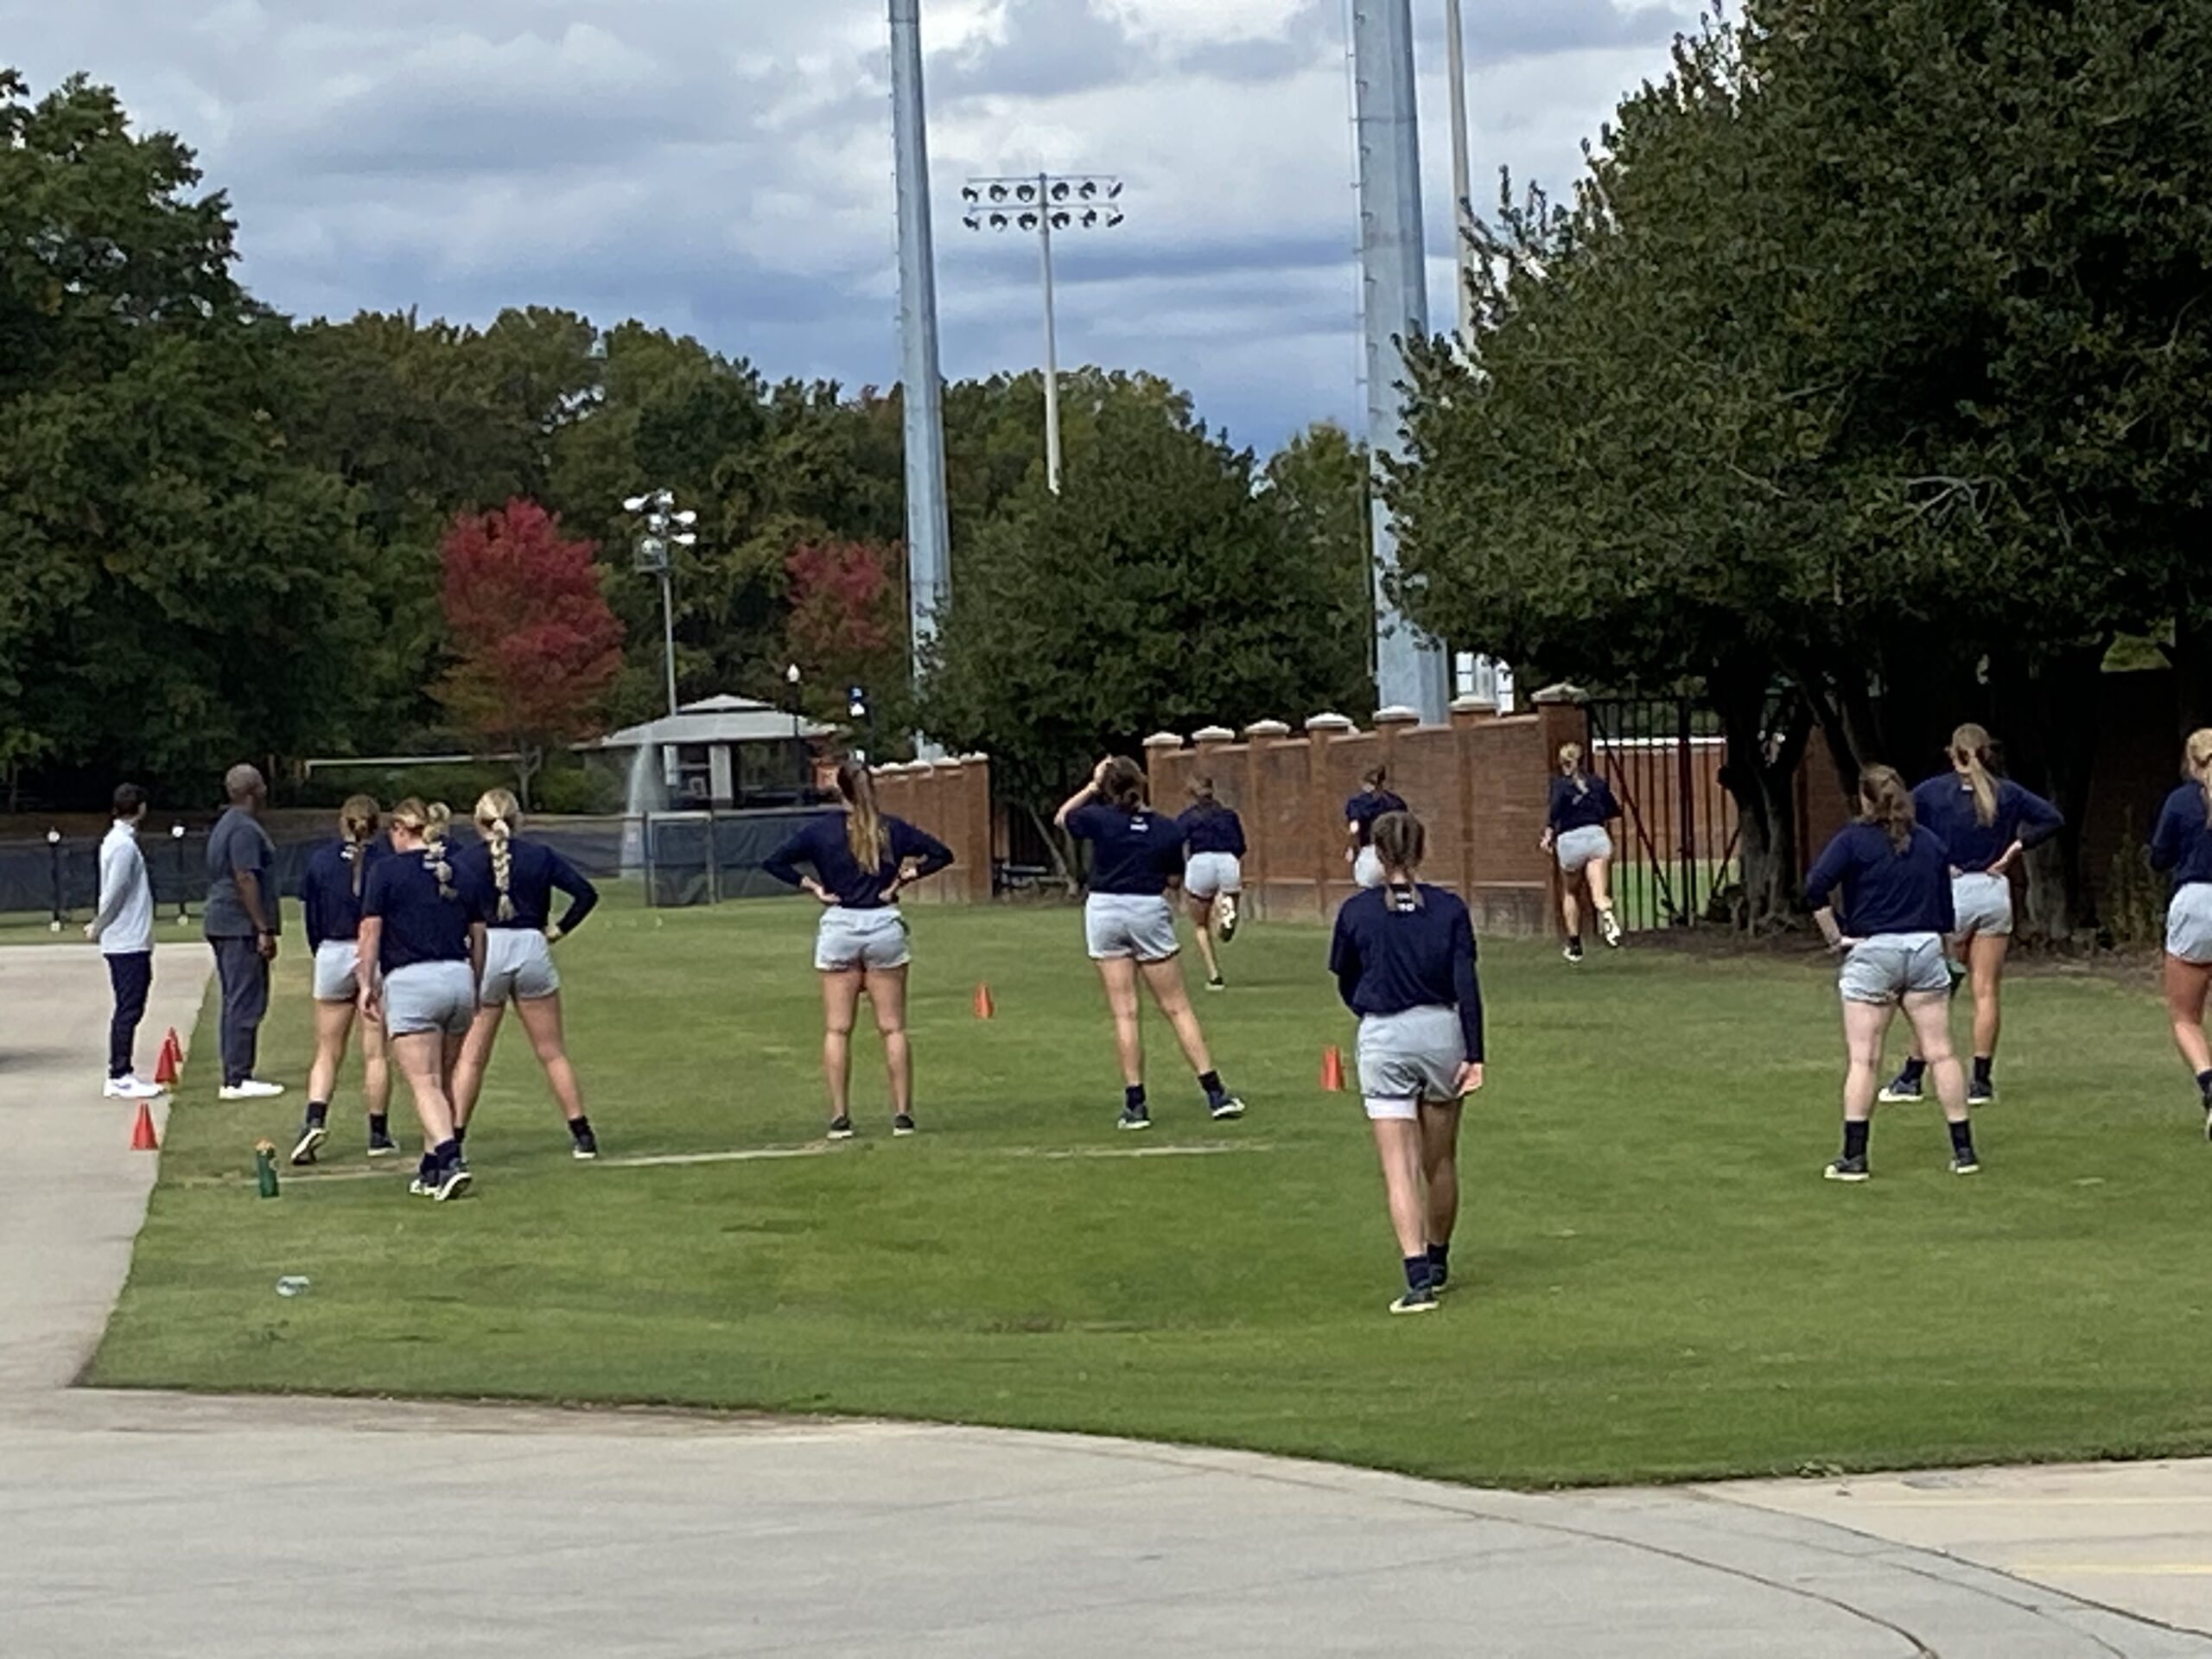 Student athletes practice on a field.